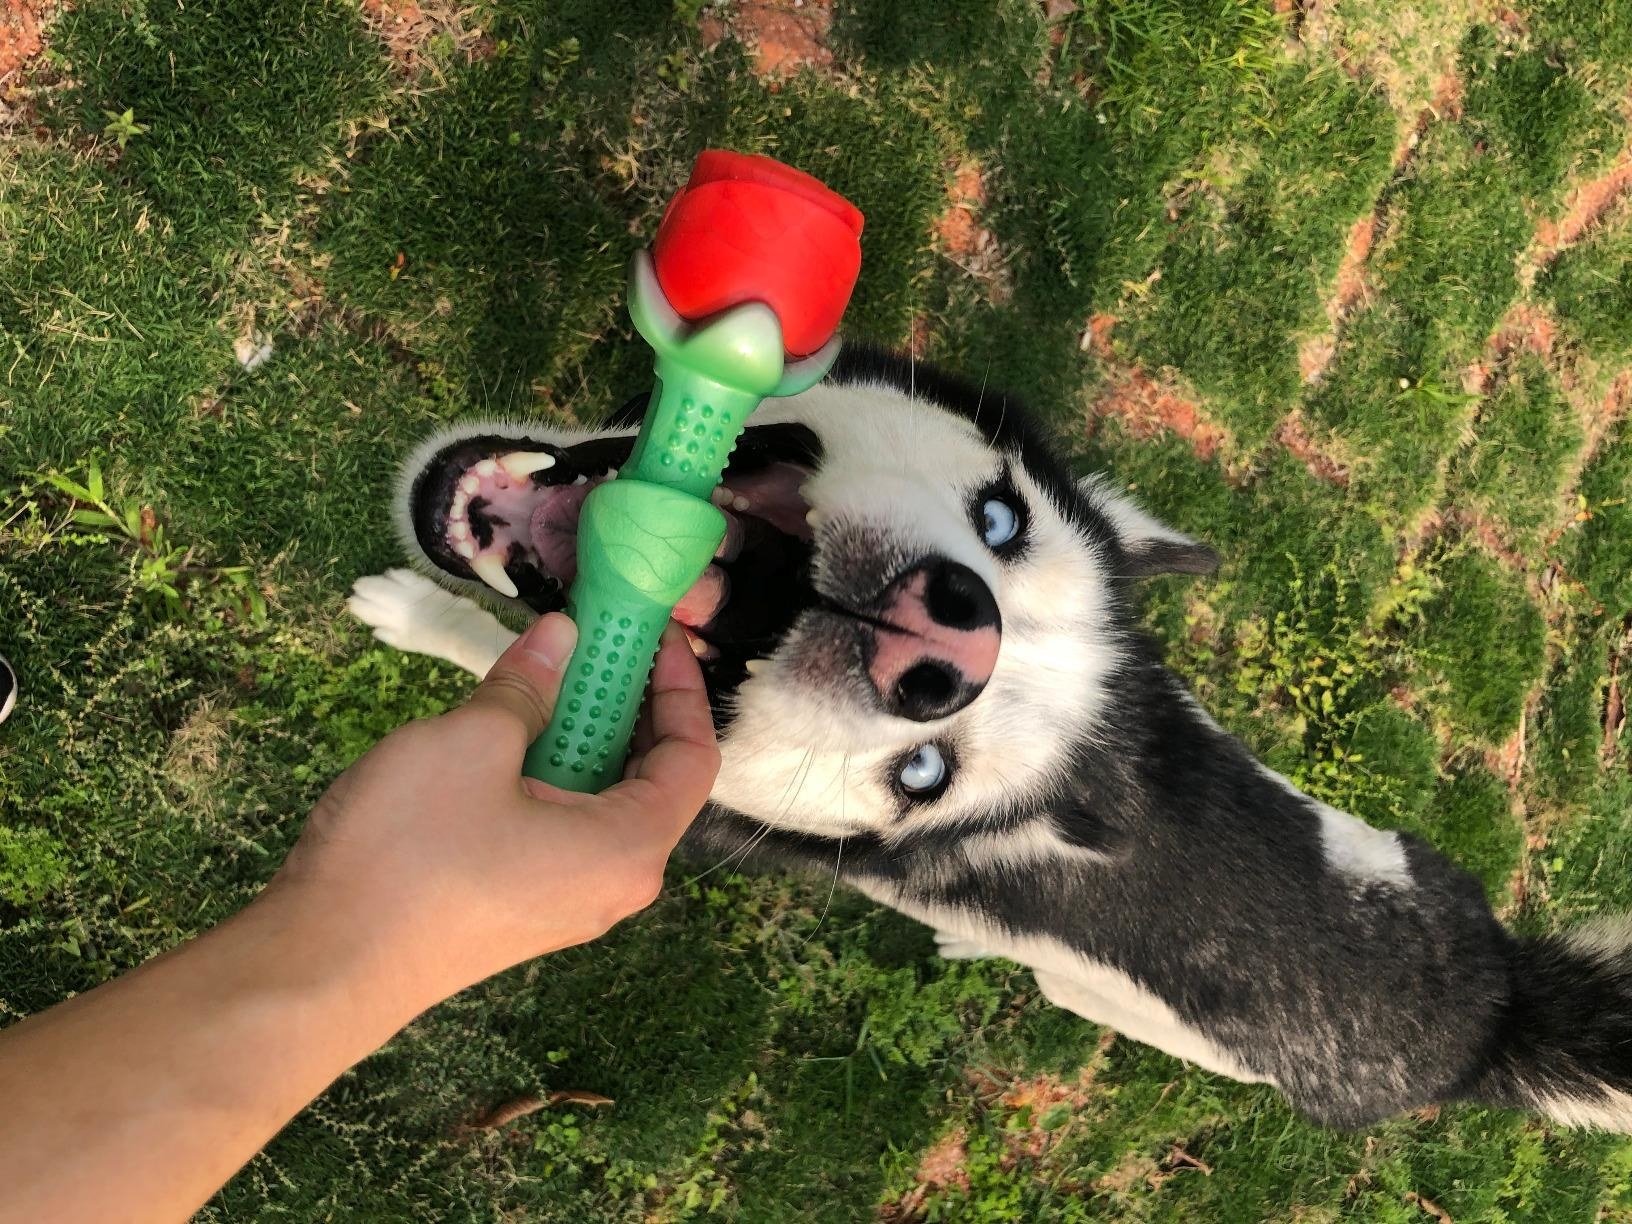 A dog plays with the toy, which has a thick, green textured stem, and a hard plastic red &quot;rose&quot; top